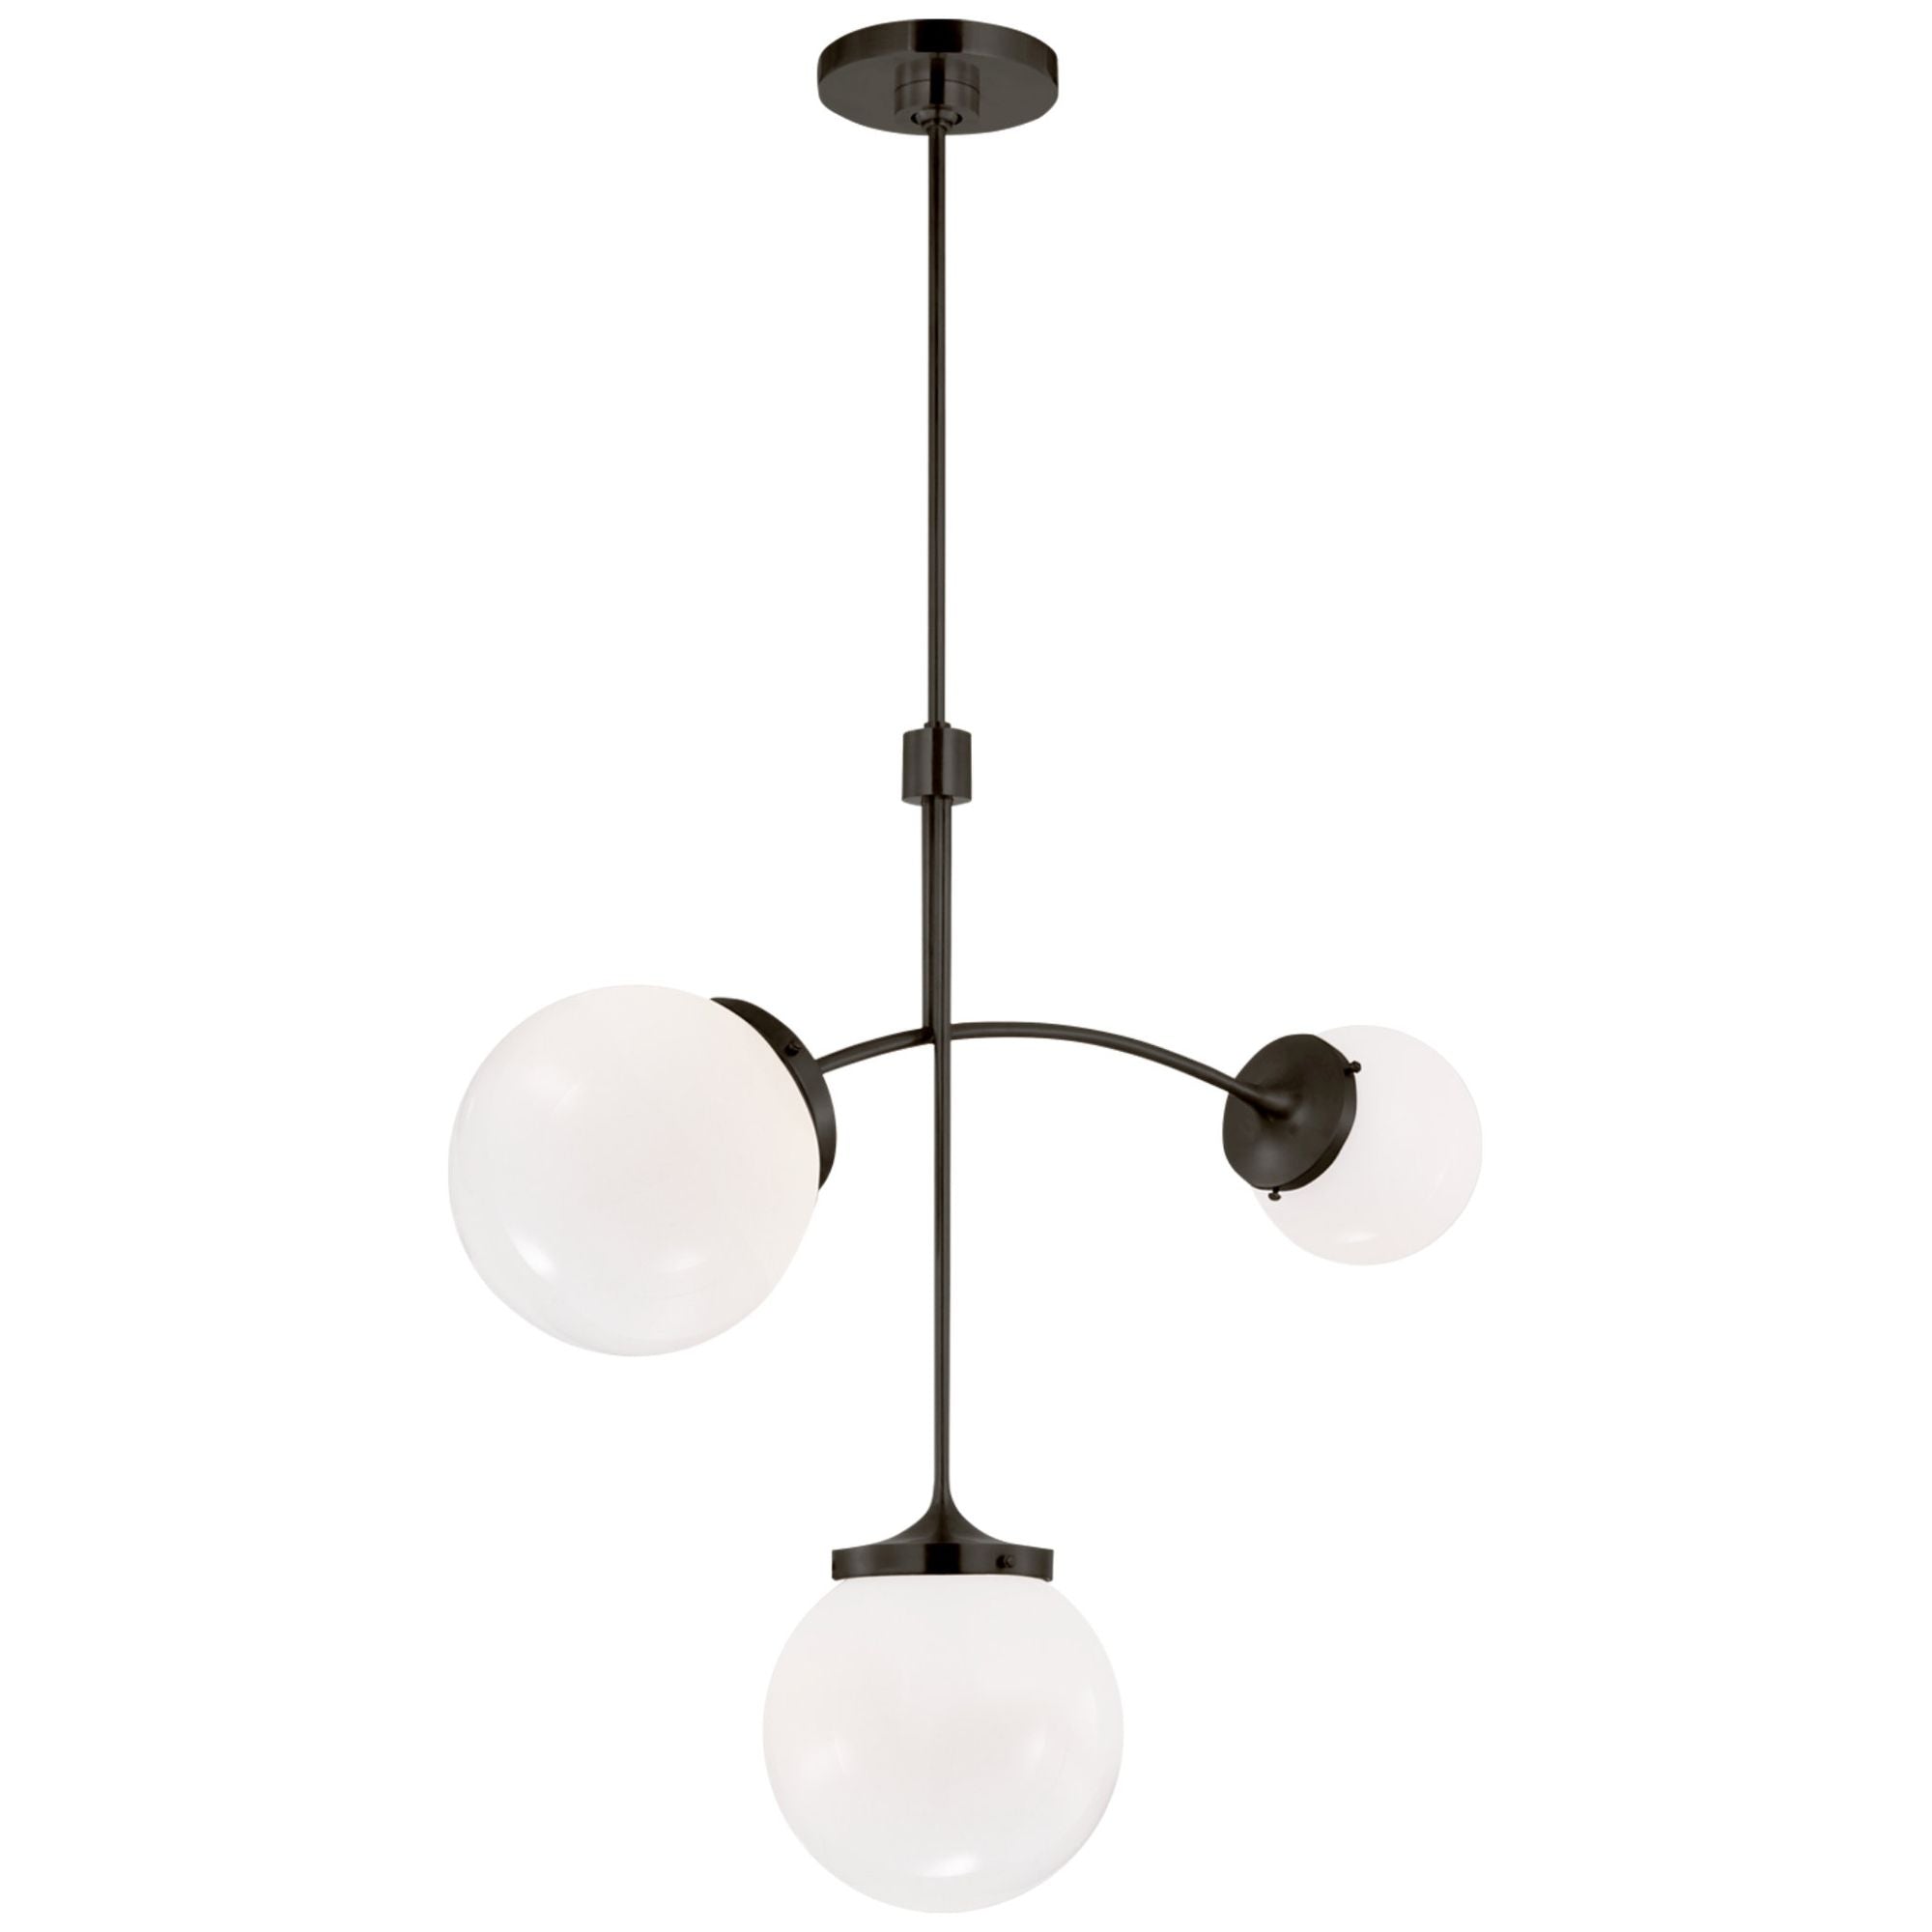 kate spade new york Prescott Small Chandelier in Bronze with White Glass